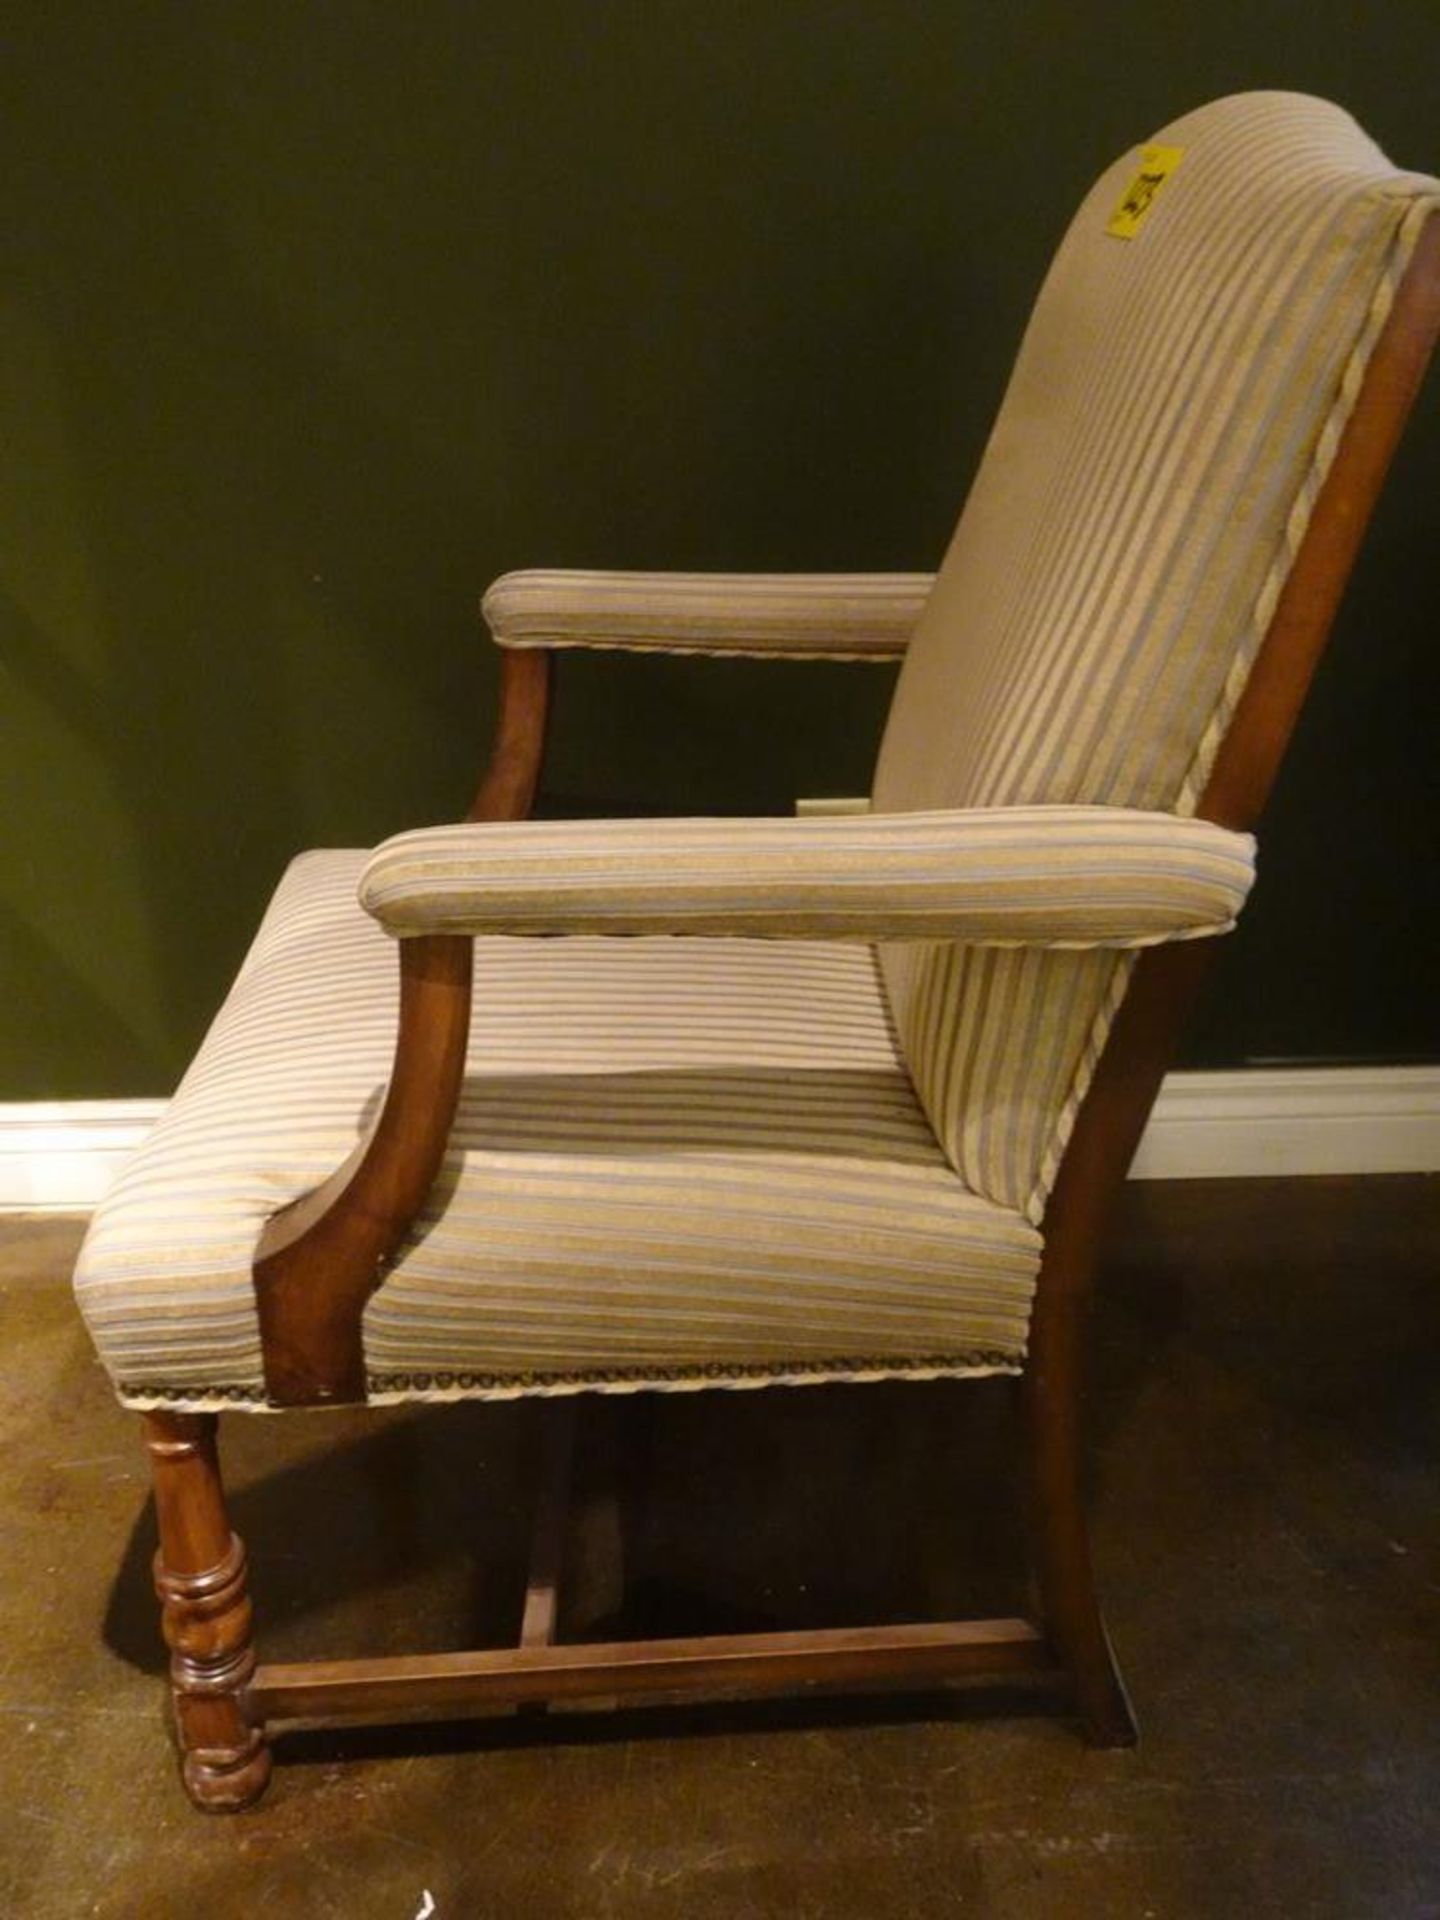 ARM CHAIR - PALE BLUE STRIPE W/STUDS - Image 3 of 3